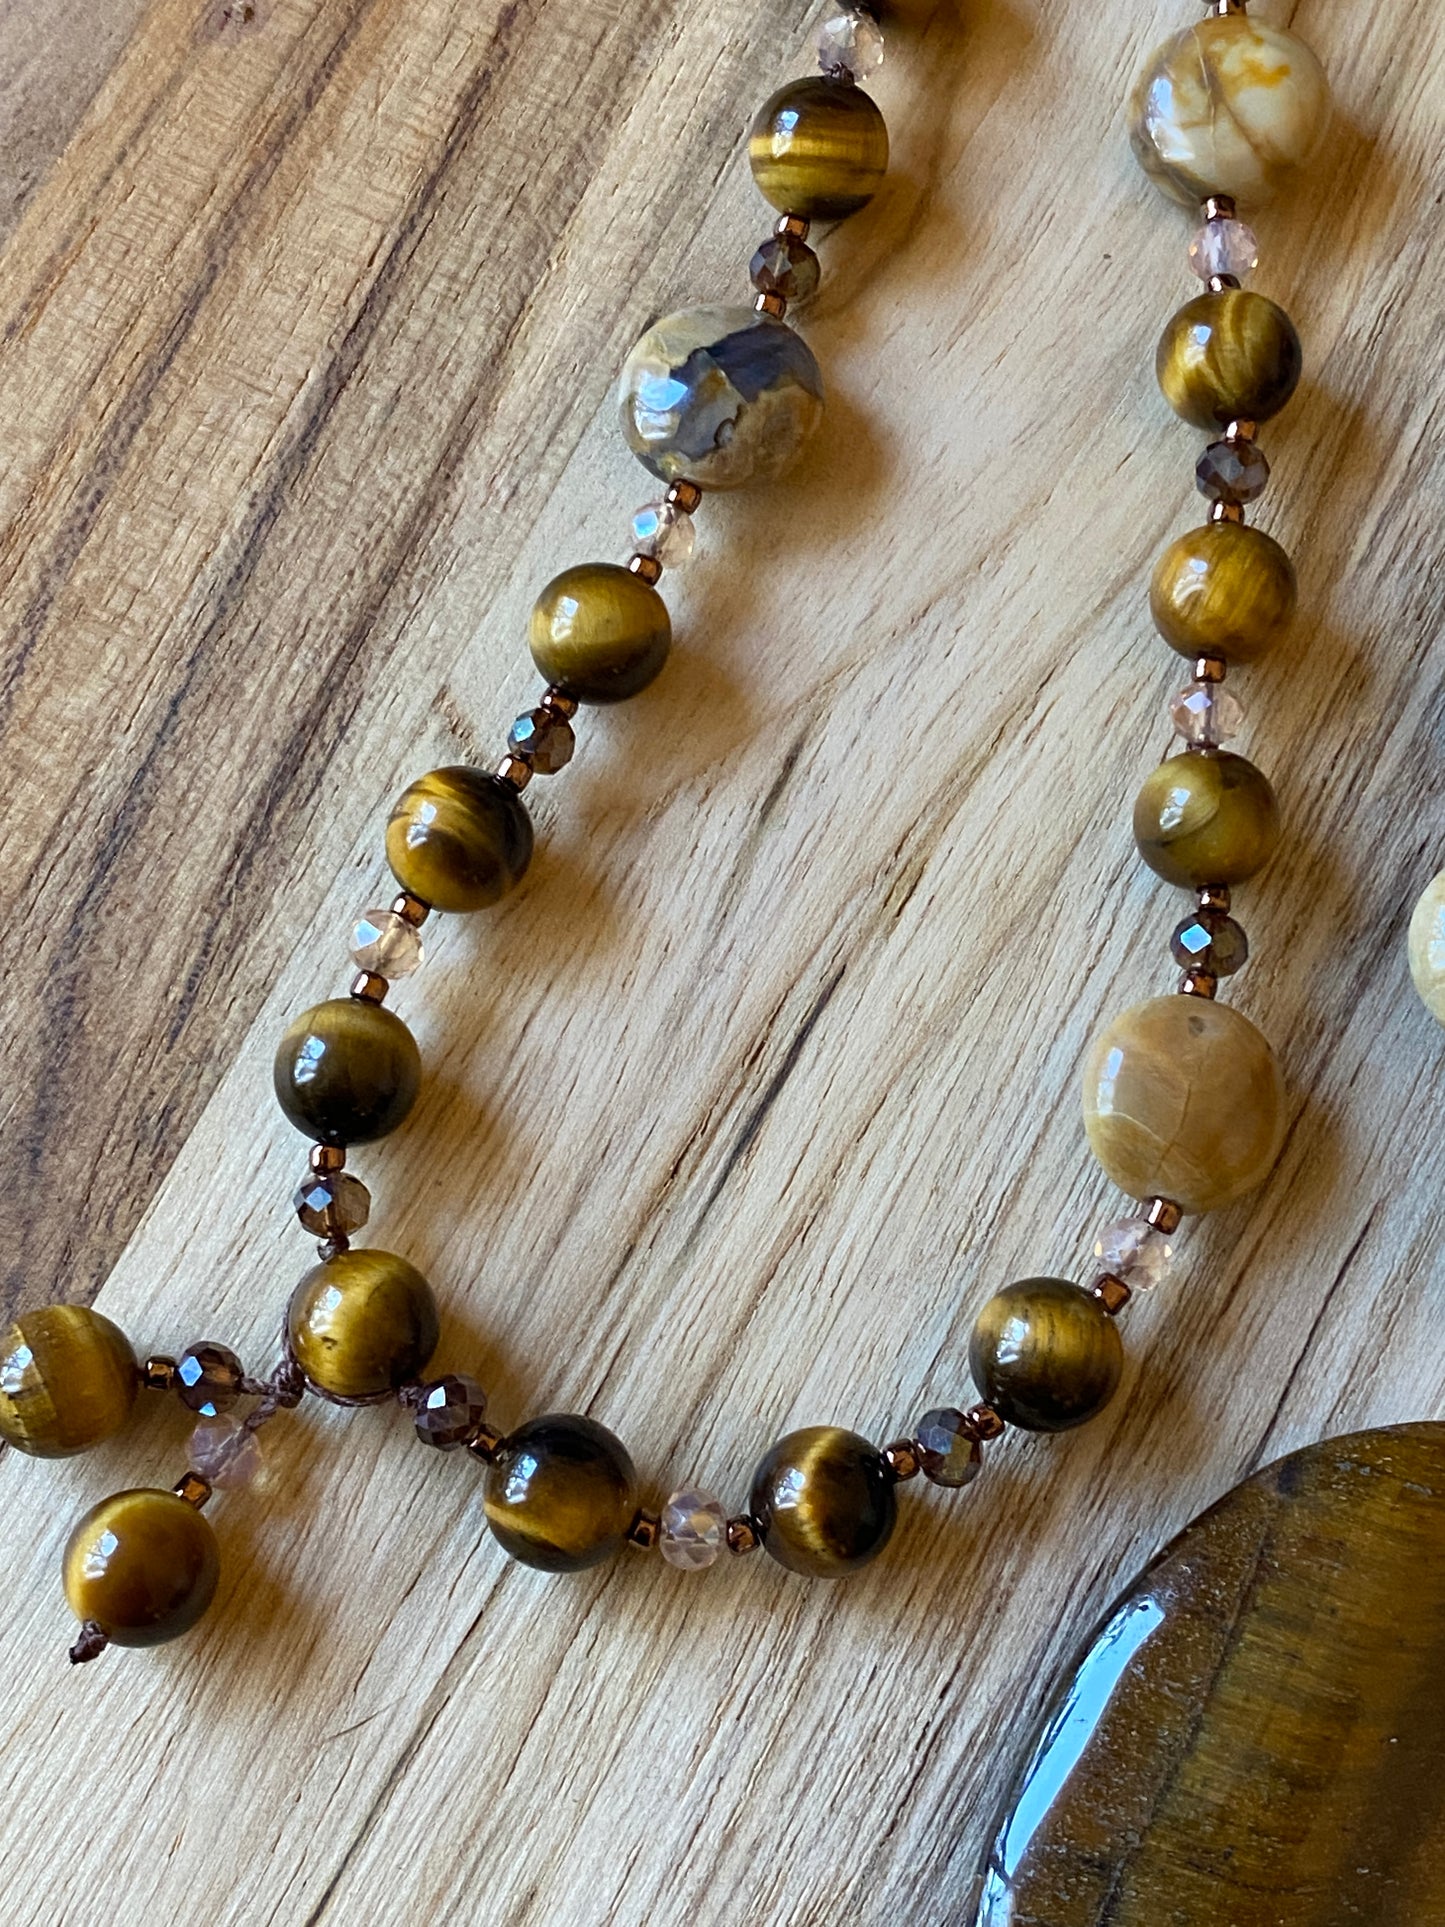 Long Tiger Eye Pendant Necklace with Agate and Crystal Beads